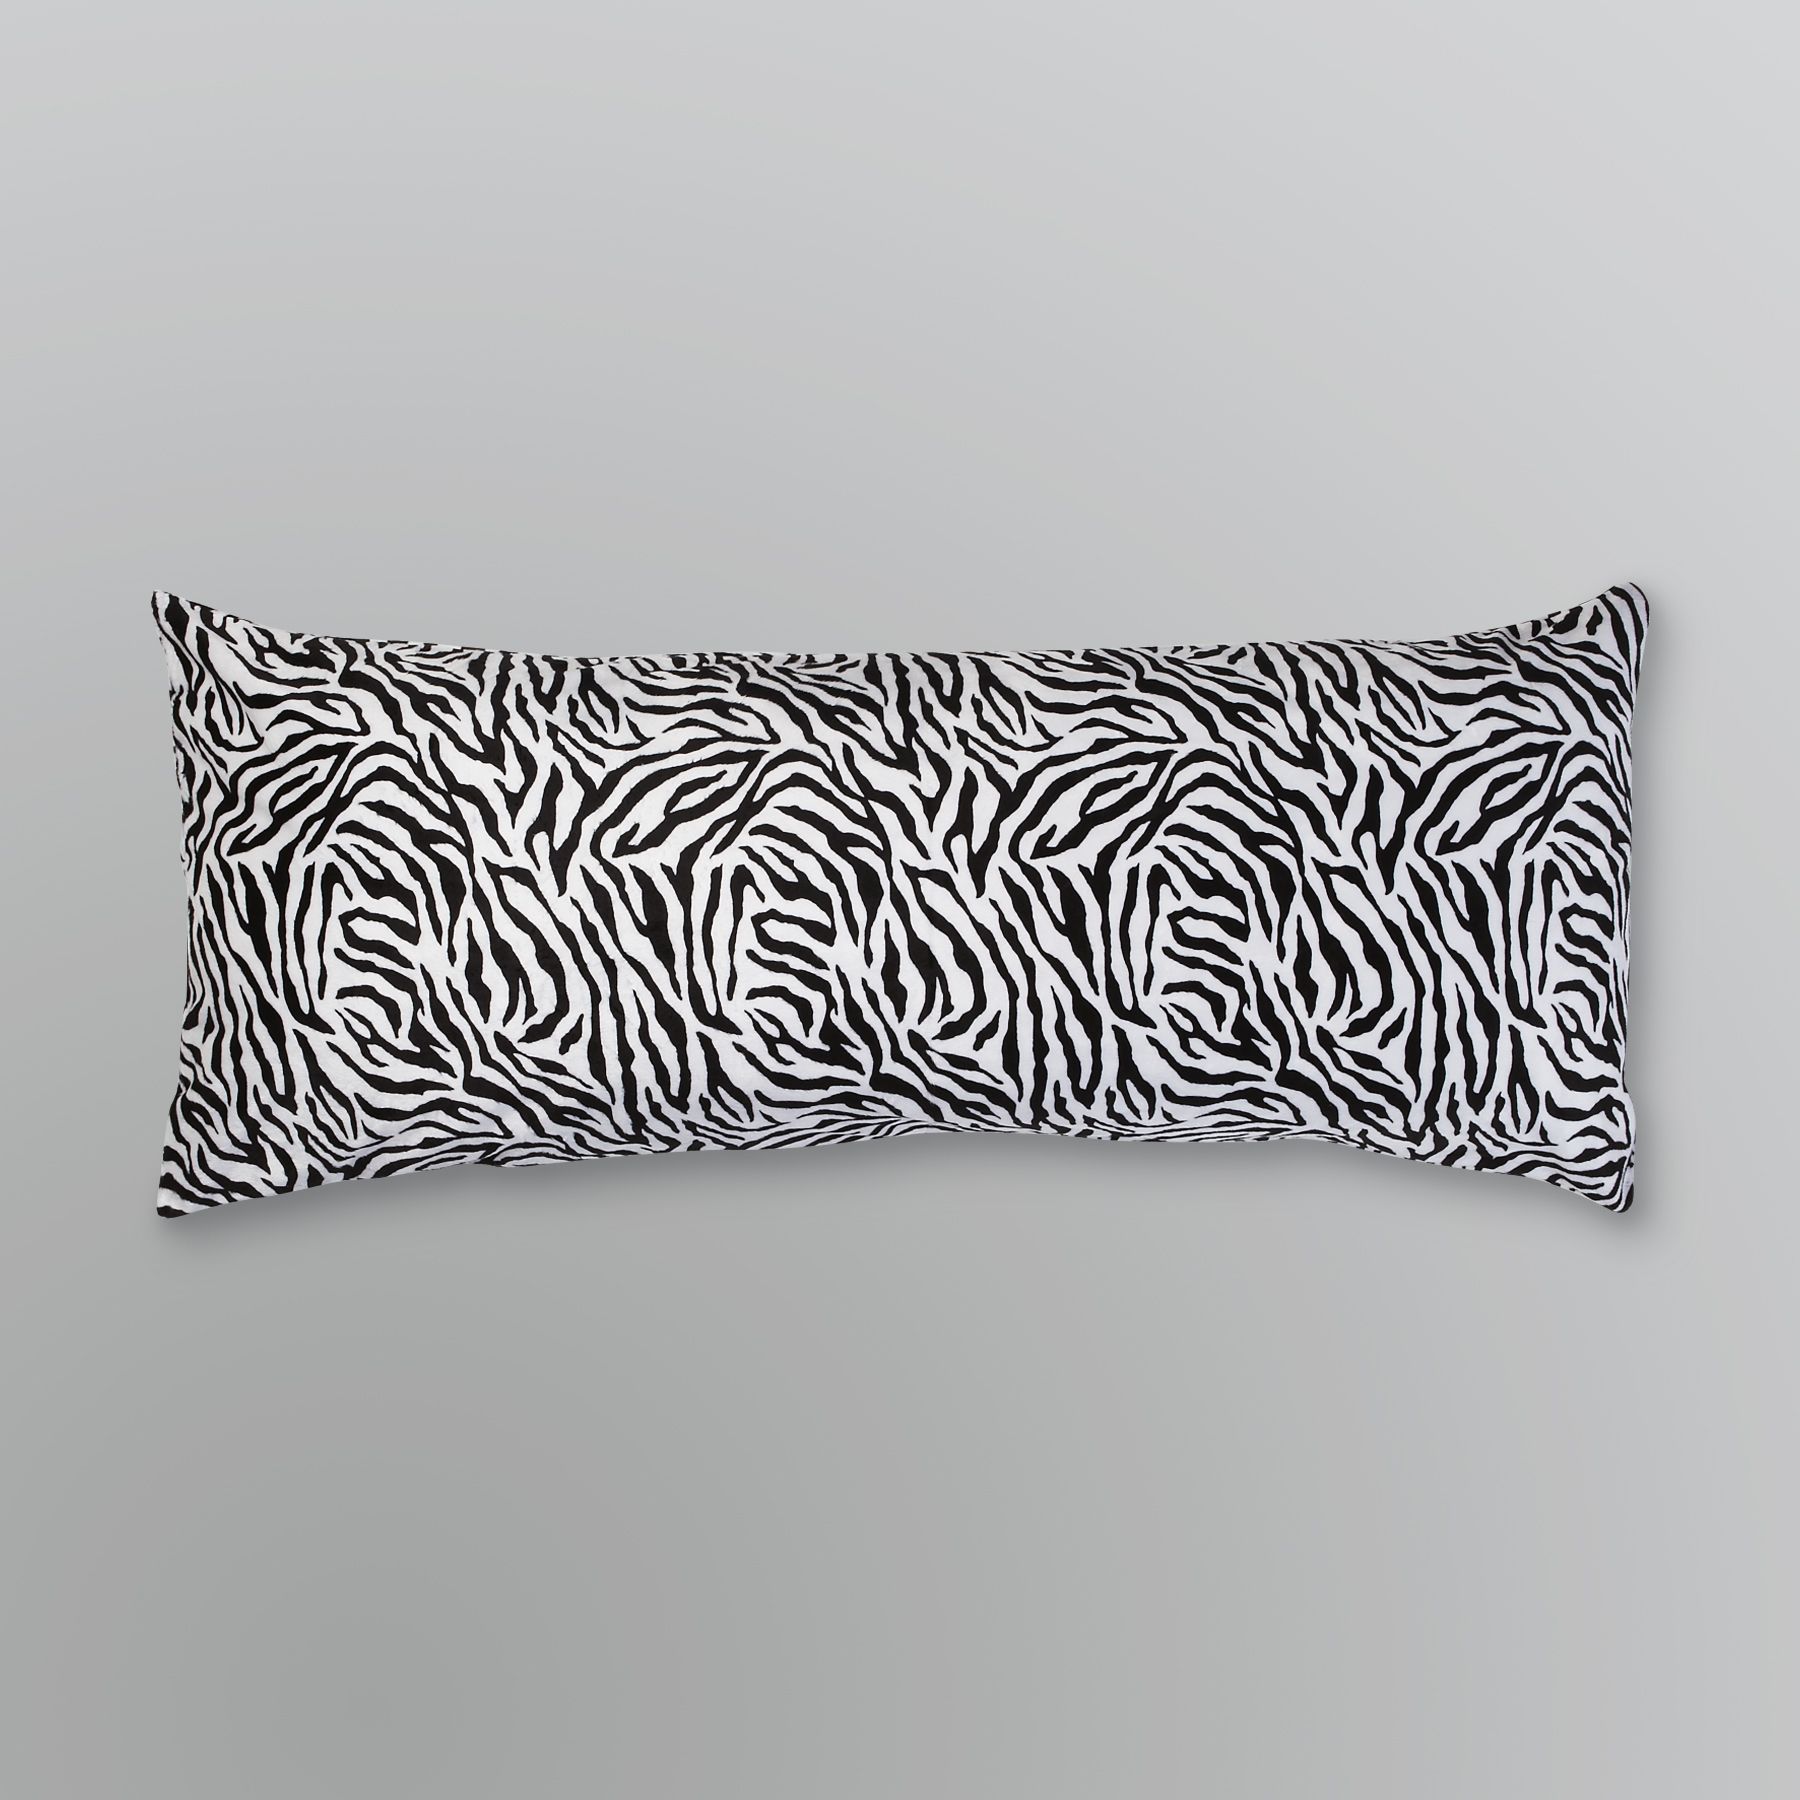 Microplush Body Pillow Cover